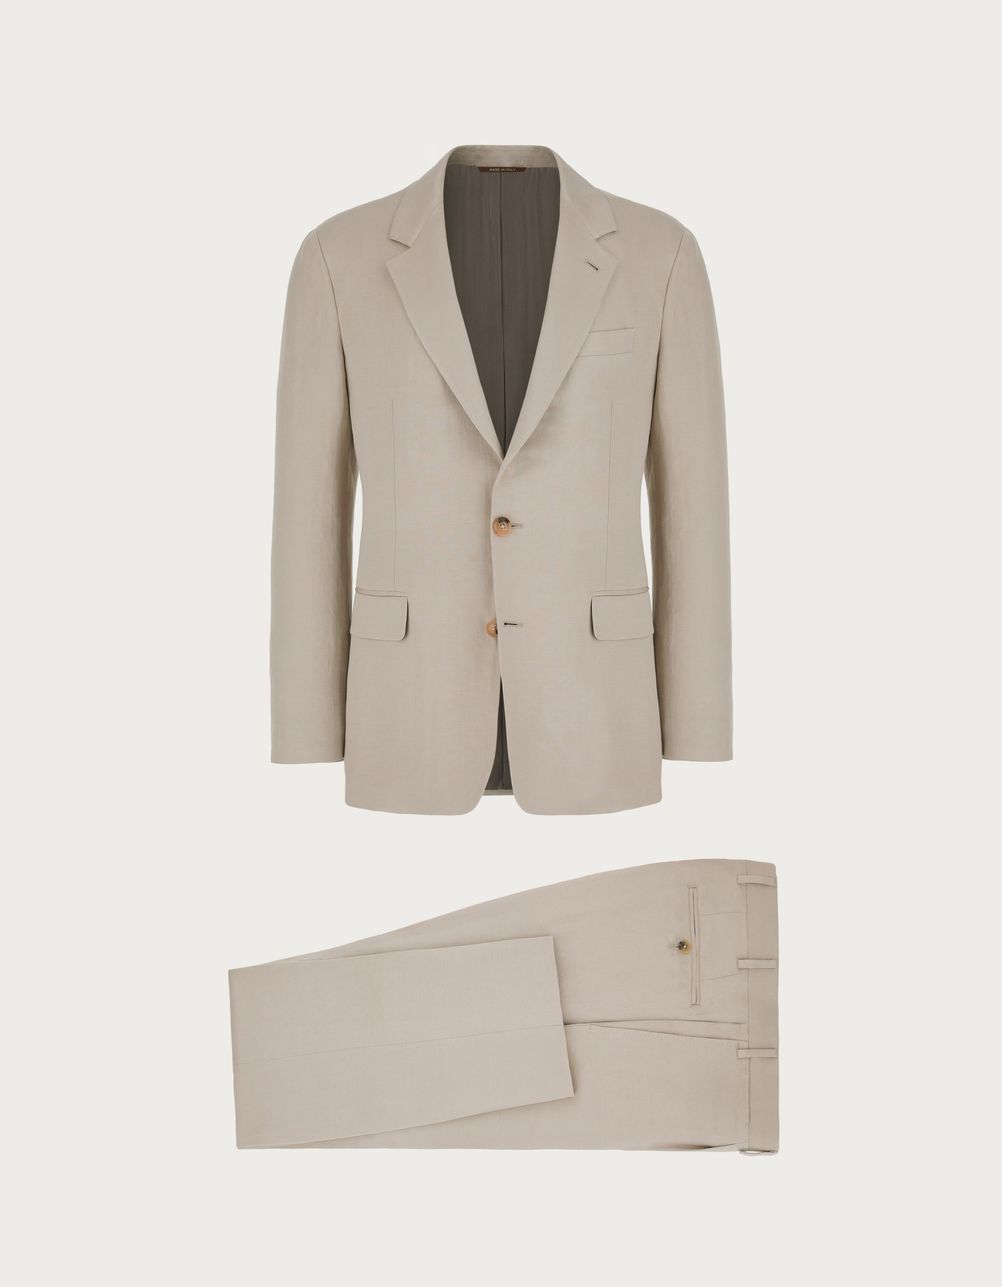 Suit in natural linen and silk - Exclusive